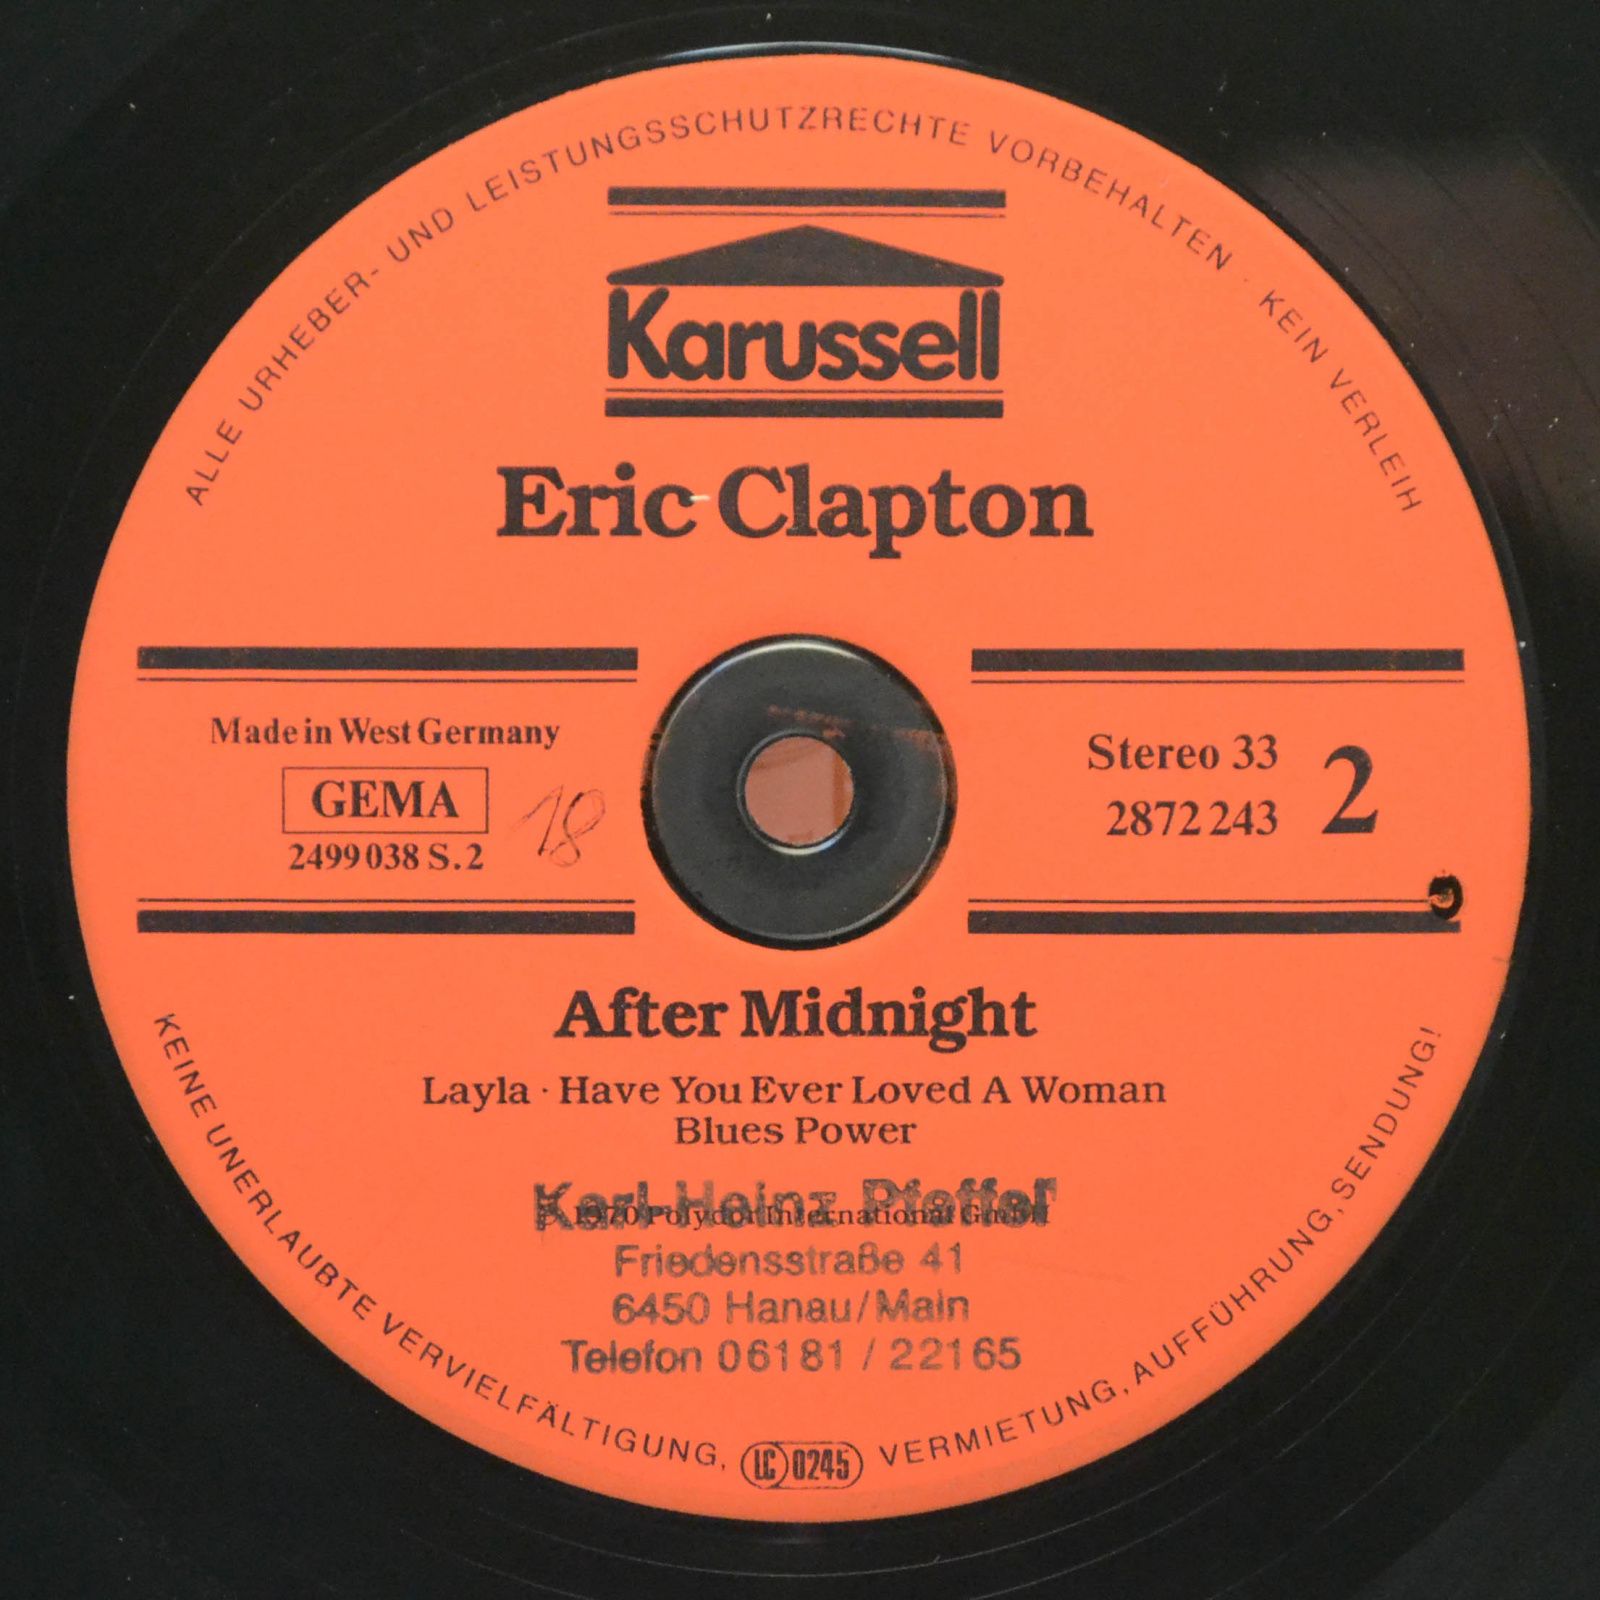 Eric Clapton — After Midnight, 1970